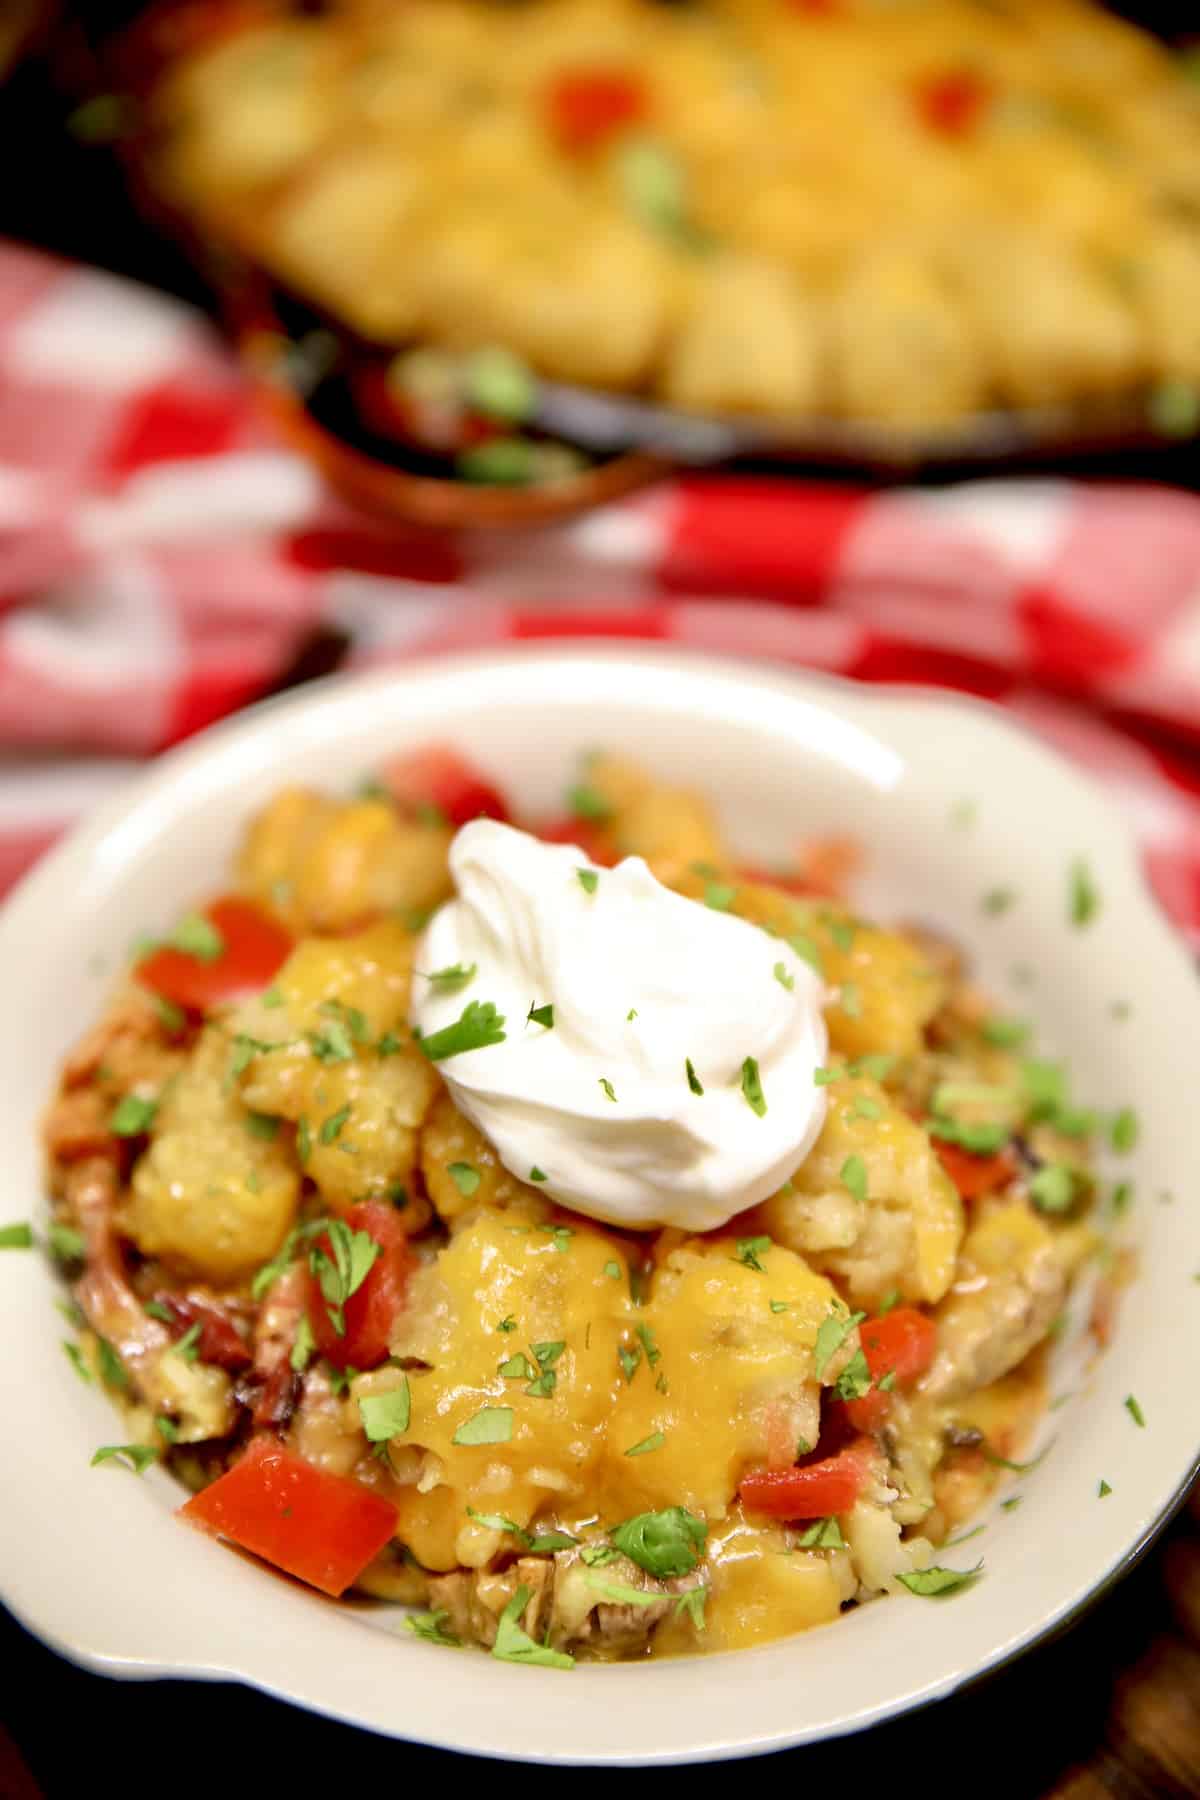 Cowboy casserole with cheesy tater tots.